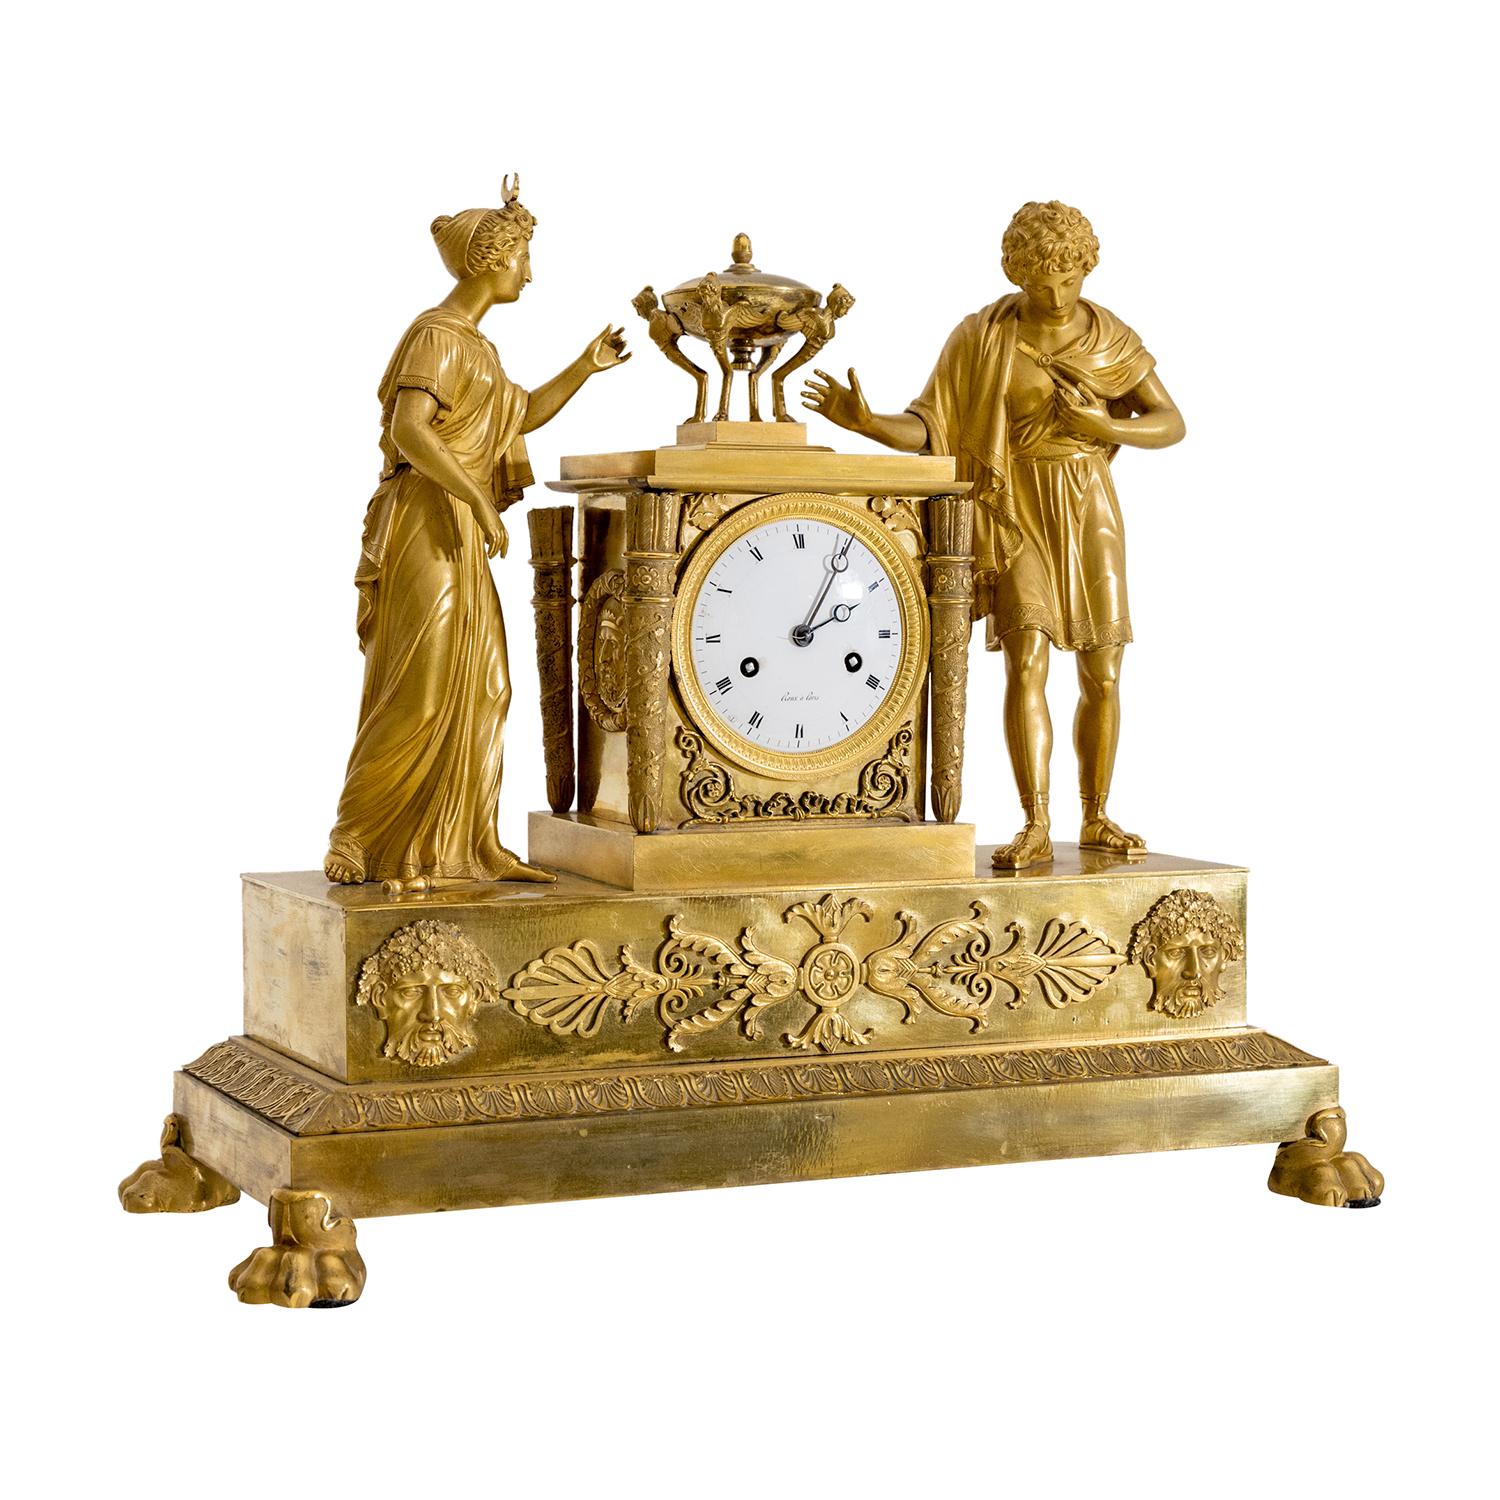 A gold, antique French table clock, pendulum made of hand crafted fire-gilded bronze, in good condition. The circular enamel dial of the Parisian pendule is detailed with Roman numerals on a white background, particularized by a polished bronze